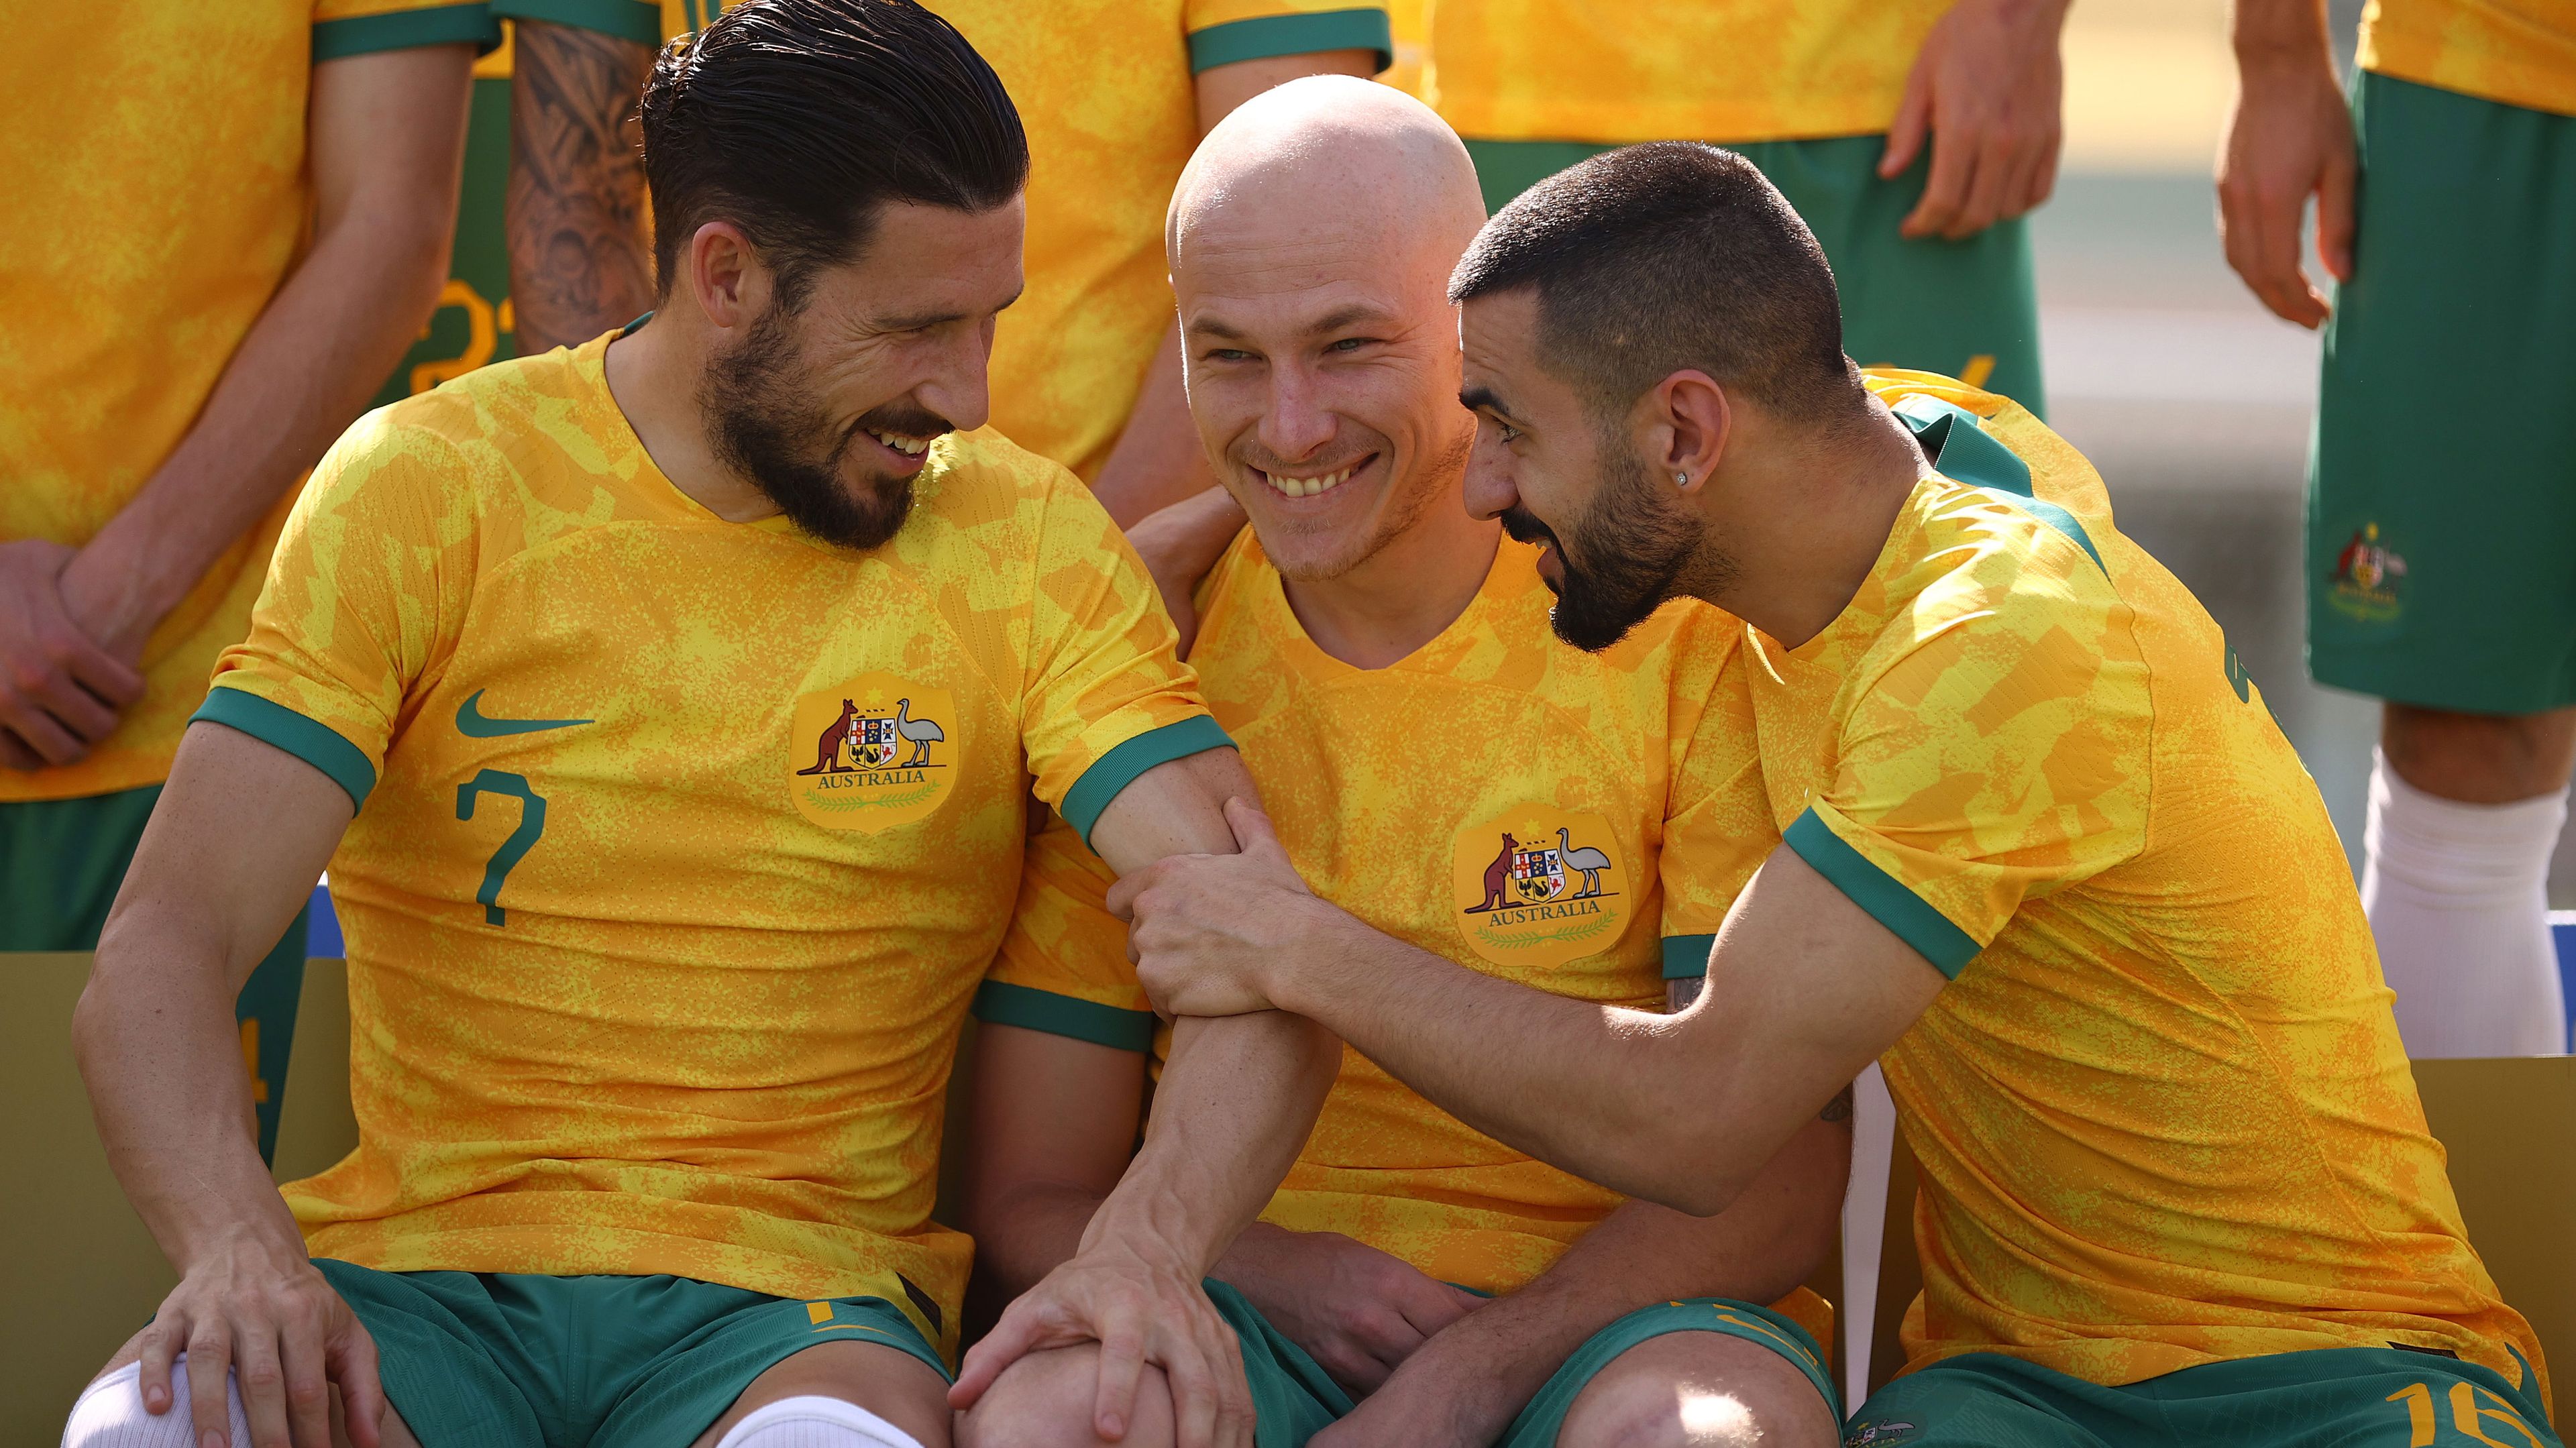 Mathew Leckie, Aaron Mooy and Aziz Behich pictured clowning around during the Socceroos&#x27; official team photo in Qatar.